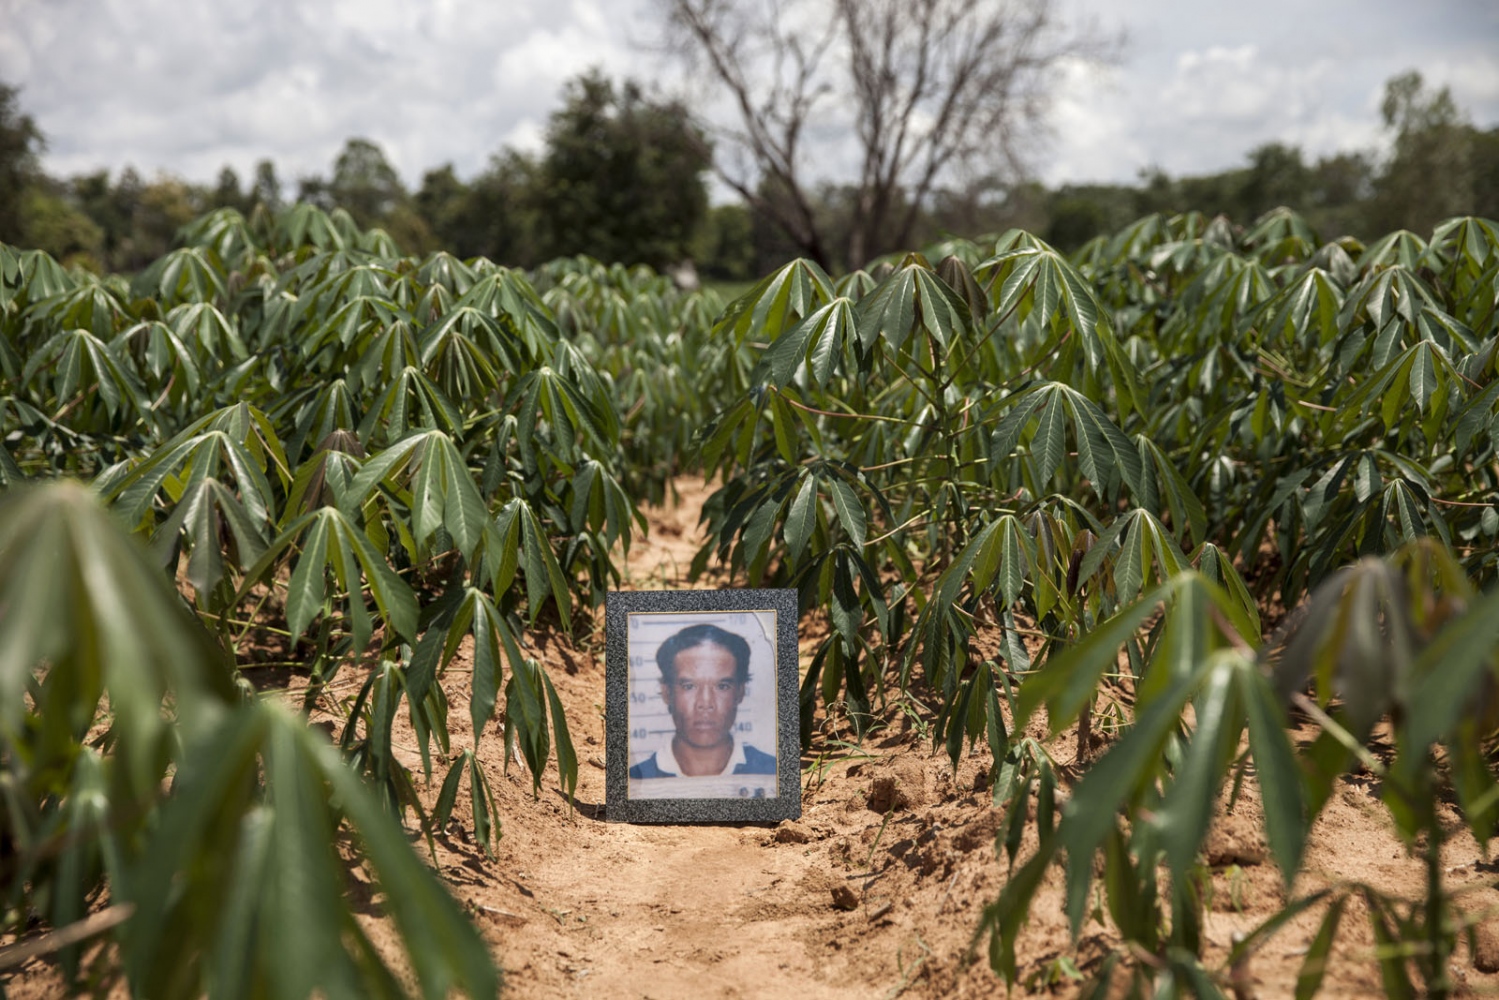 FOR THOSE WHO DIED TRYING -  Jun Boonkhunton was shot dead in a field near his...